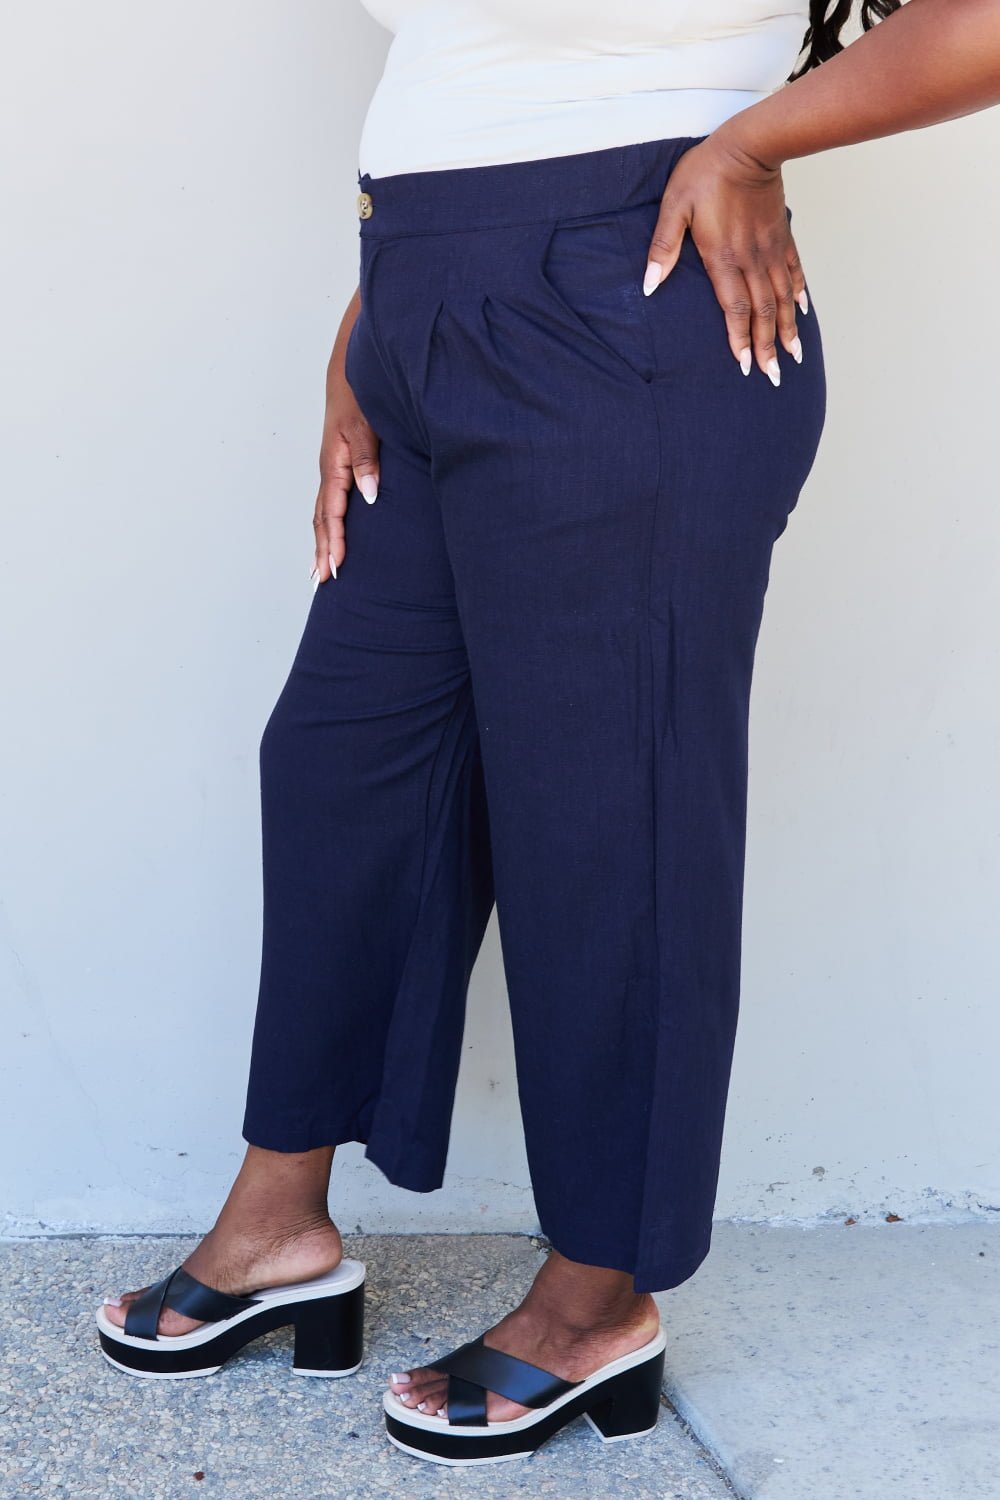 Pleated Linen Blend Cropped Pants in NavyPantsAnd the Why